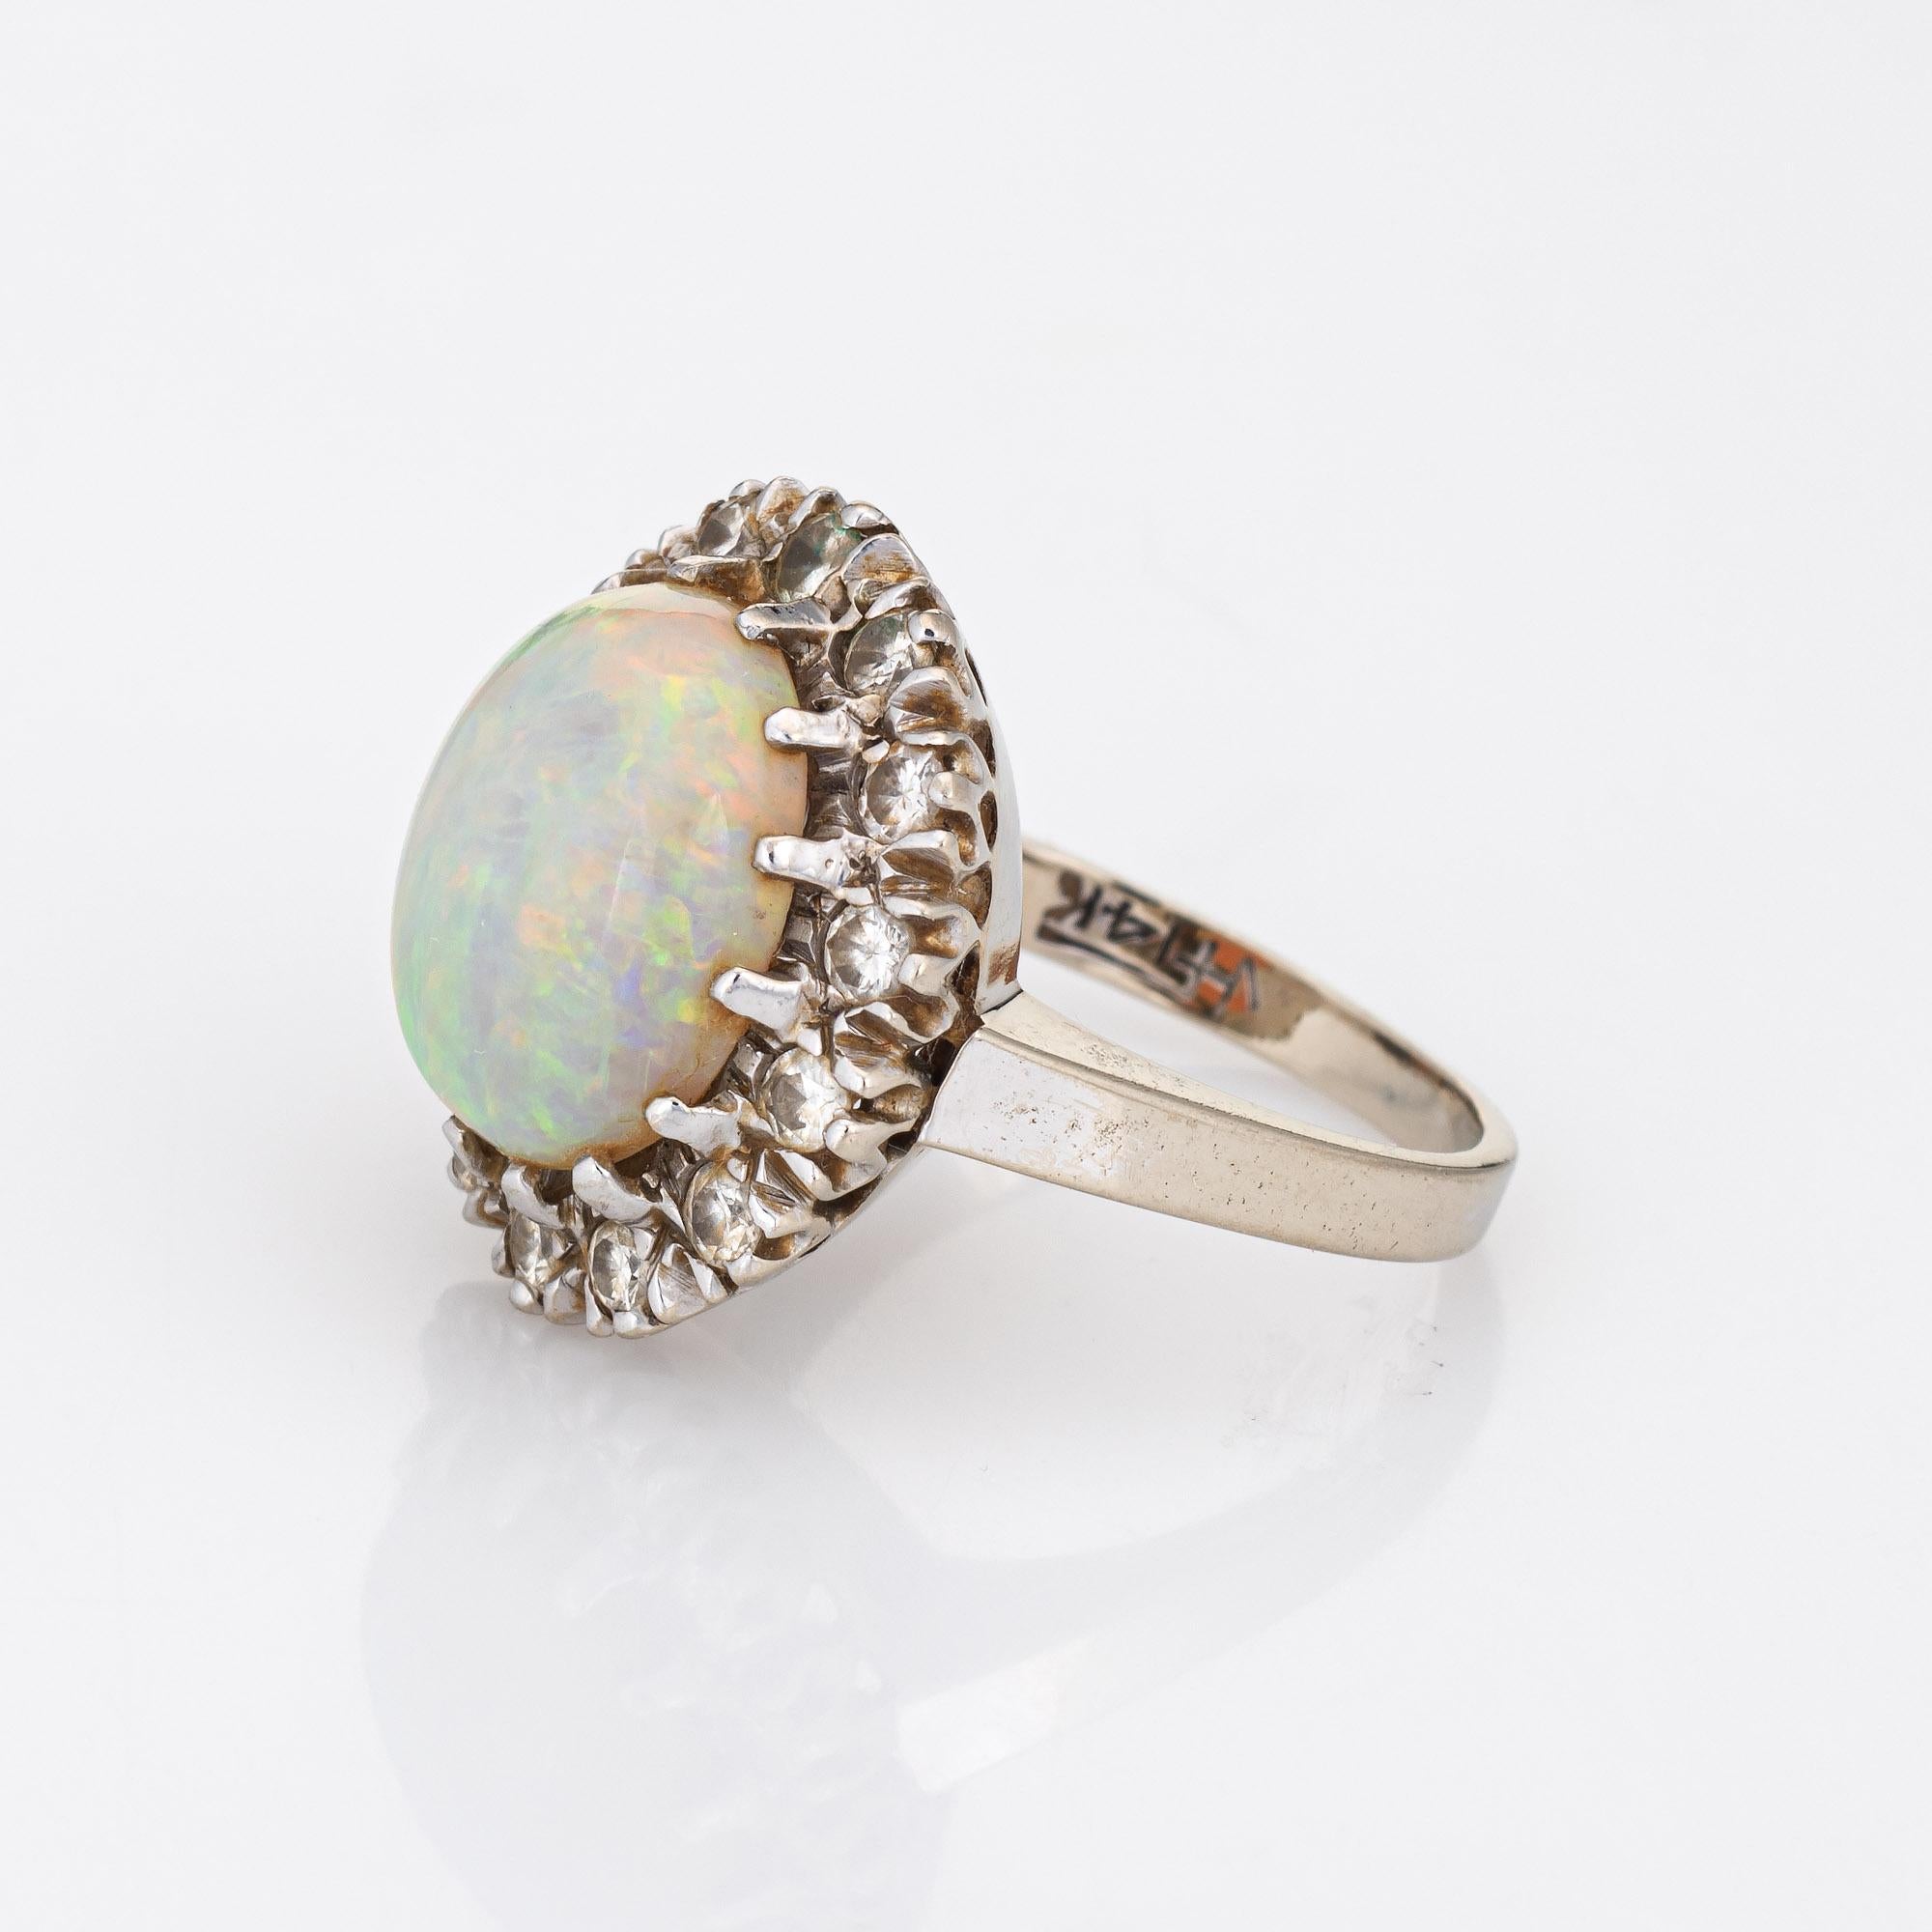 Cabochon Vintage Natural Opal Diamond Ring 14k White Gold Cocktail Oval Estate Jewelry For Sale